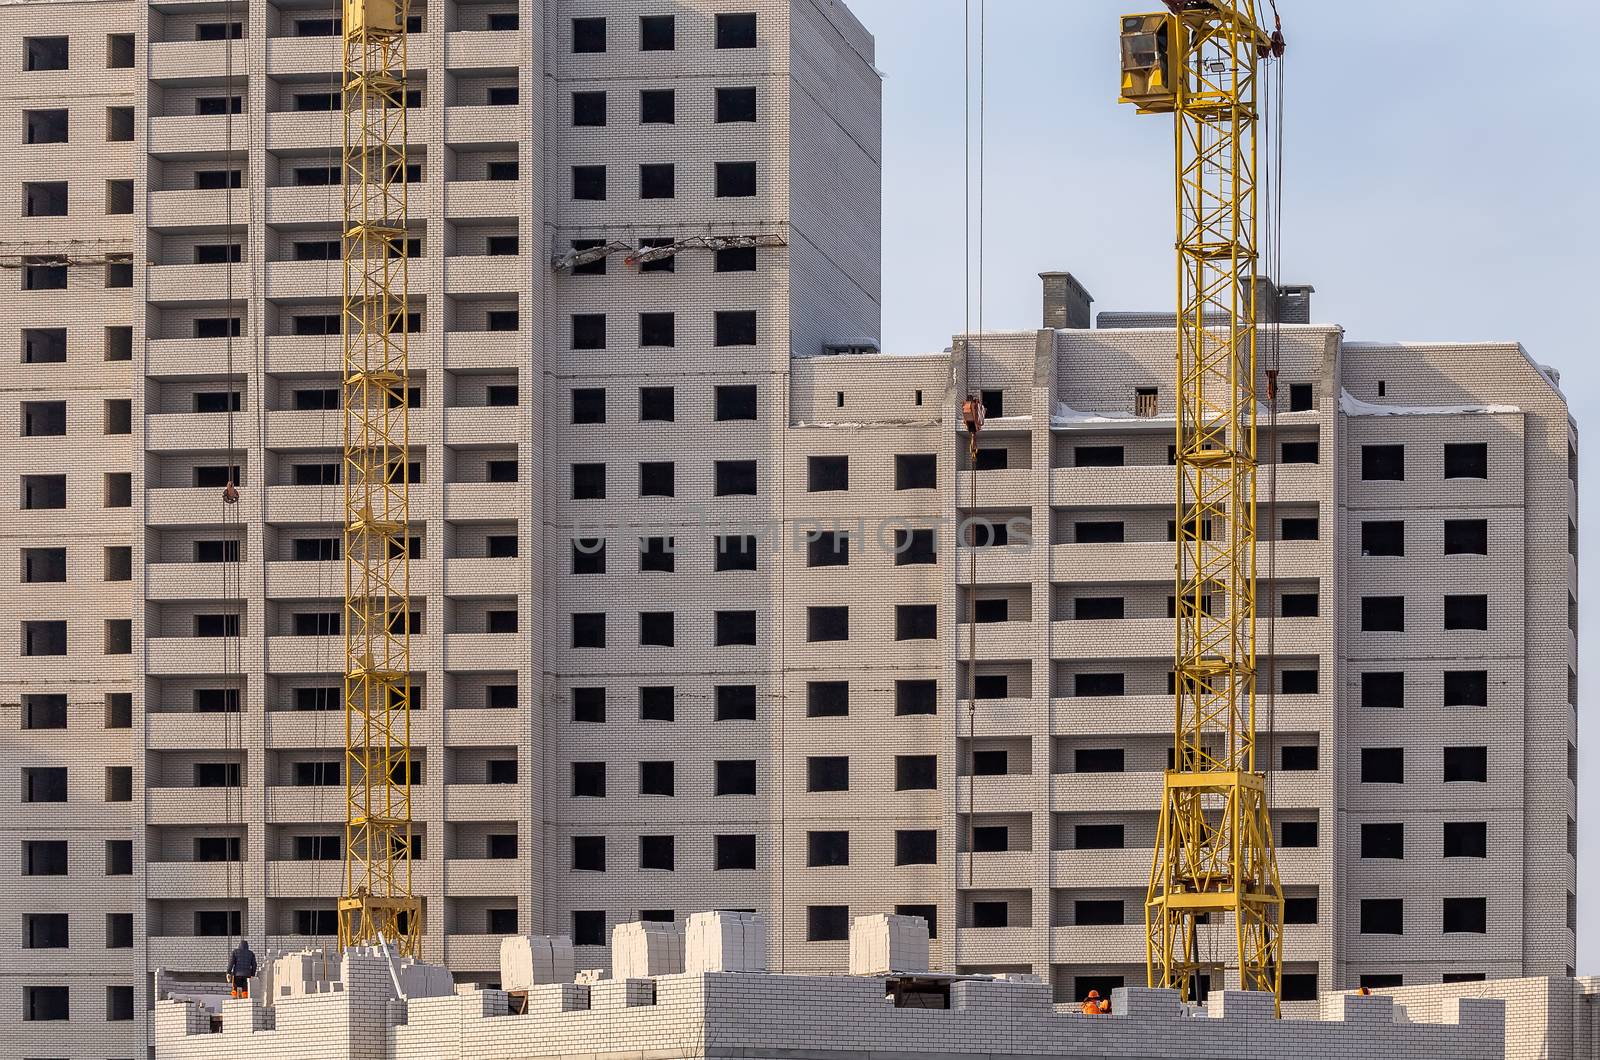 Construction site. Unfinished apartment buildings. Construction workers laying bricks. Special cranes in the middle